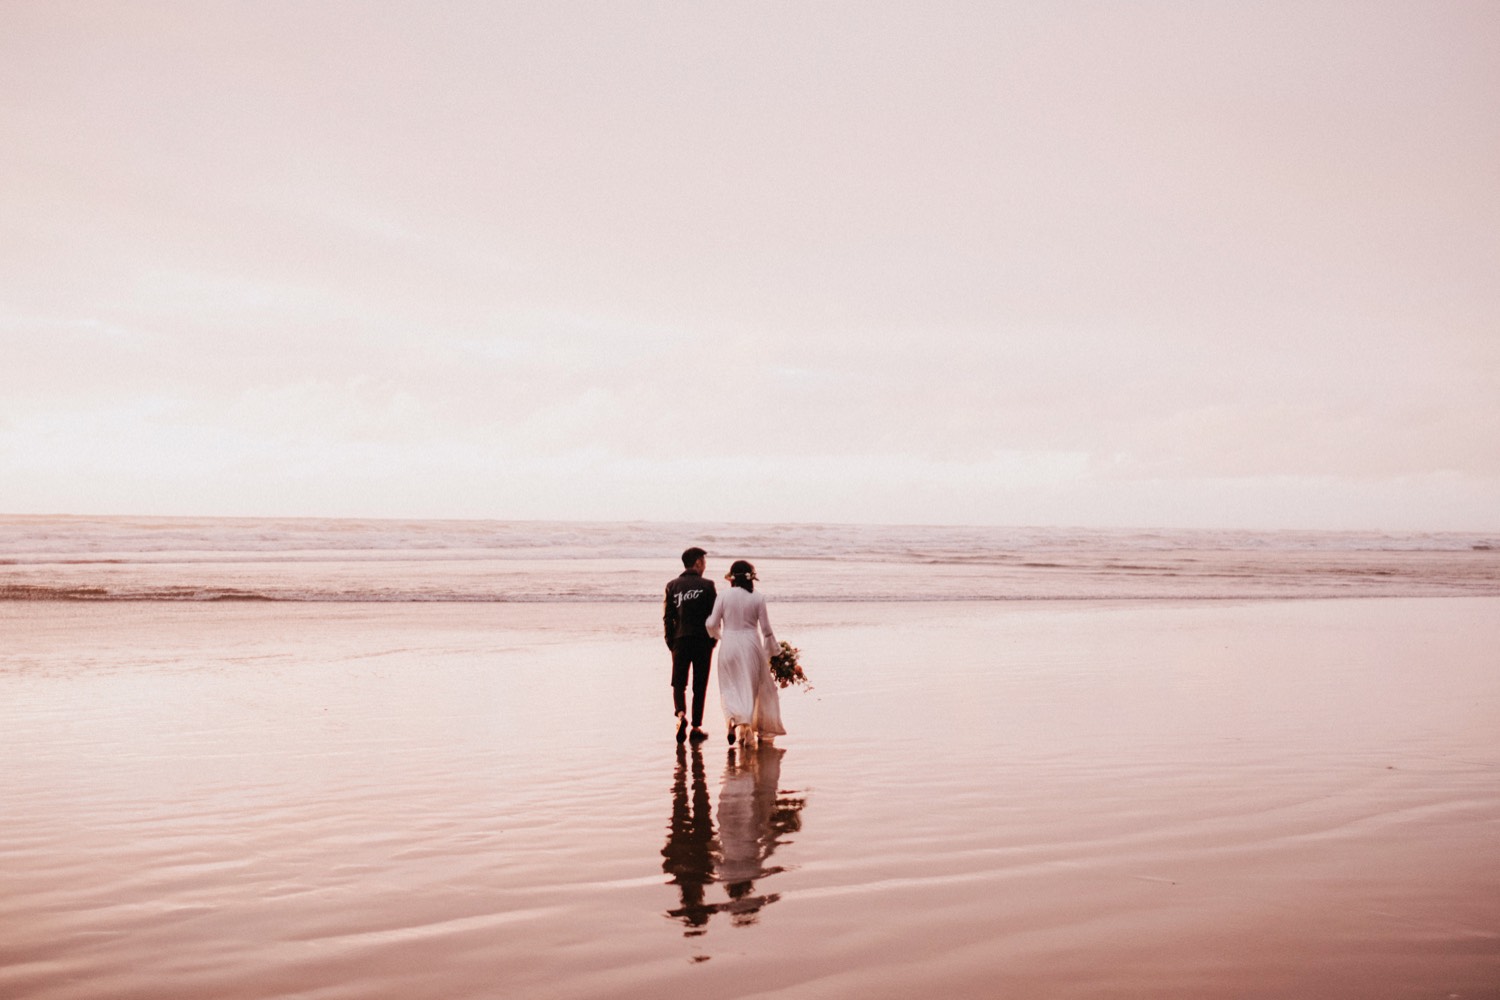 The Loveliest Cannon Beach Wedding at Sunset you'll see today.